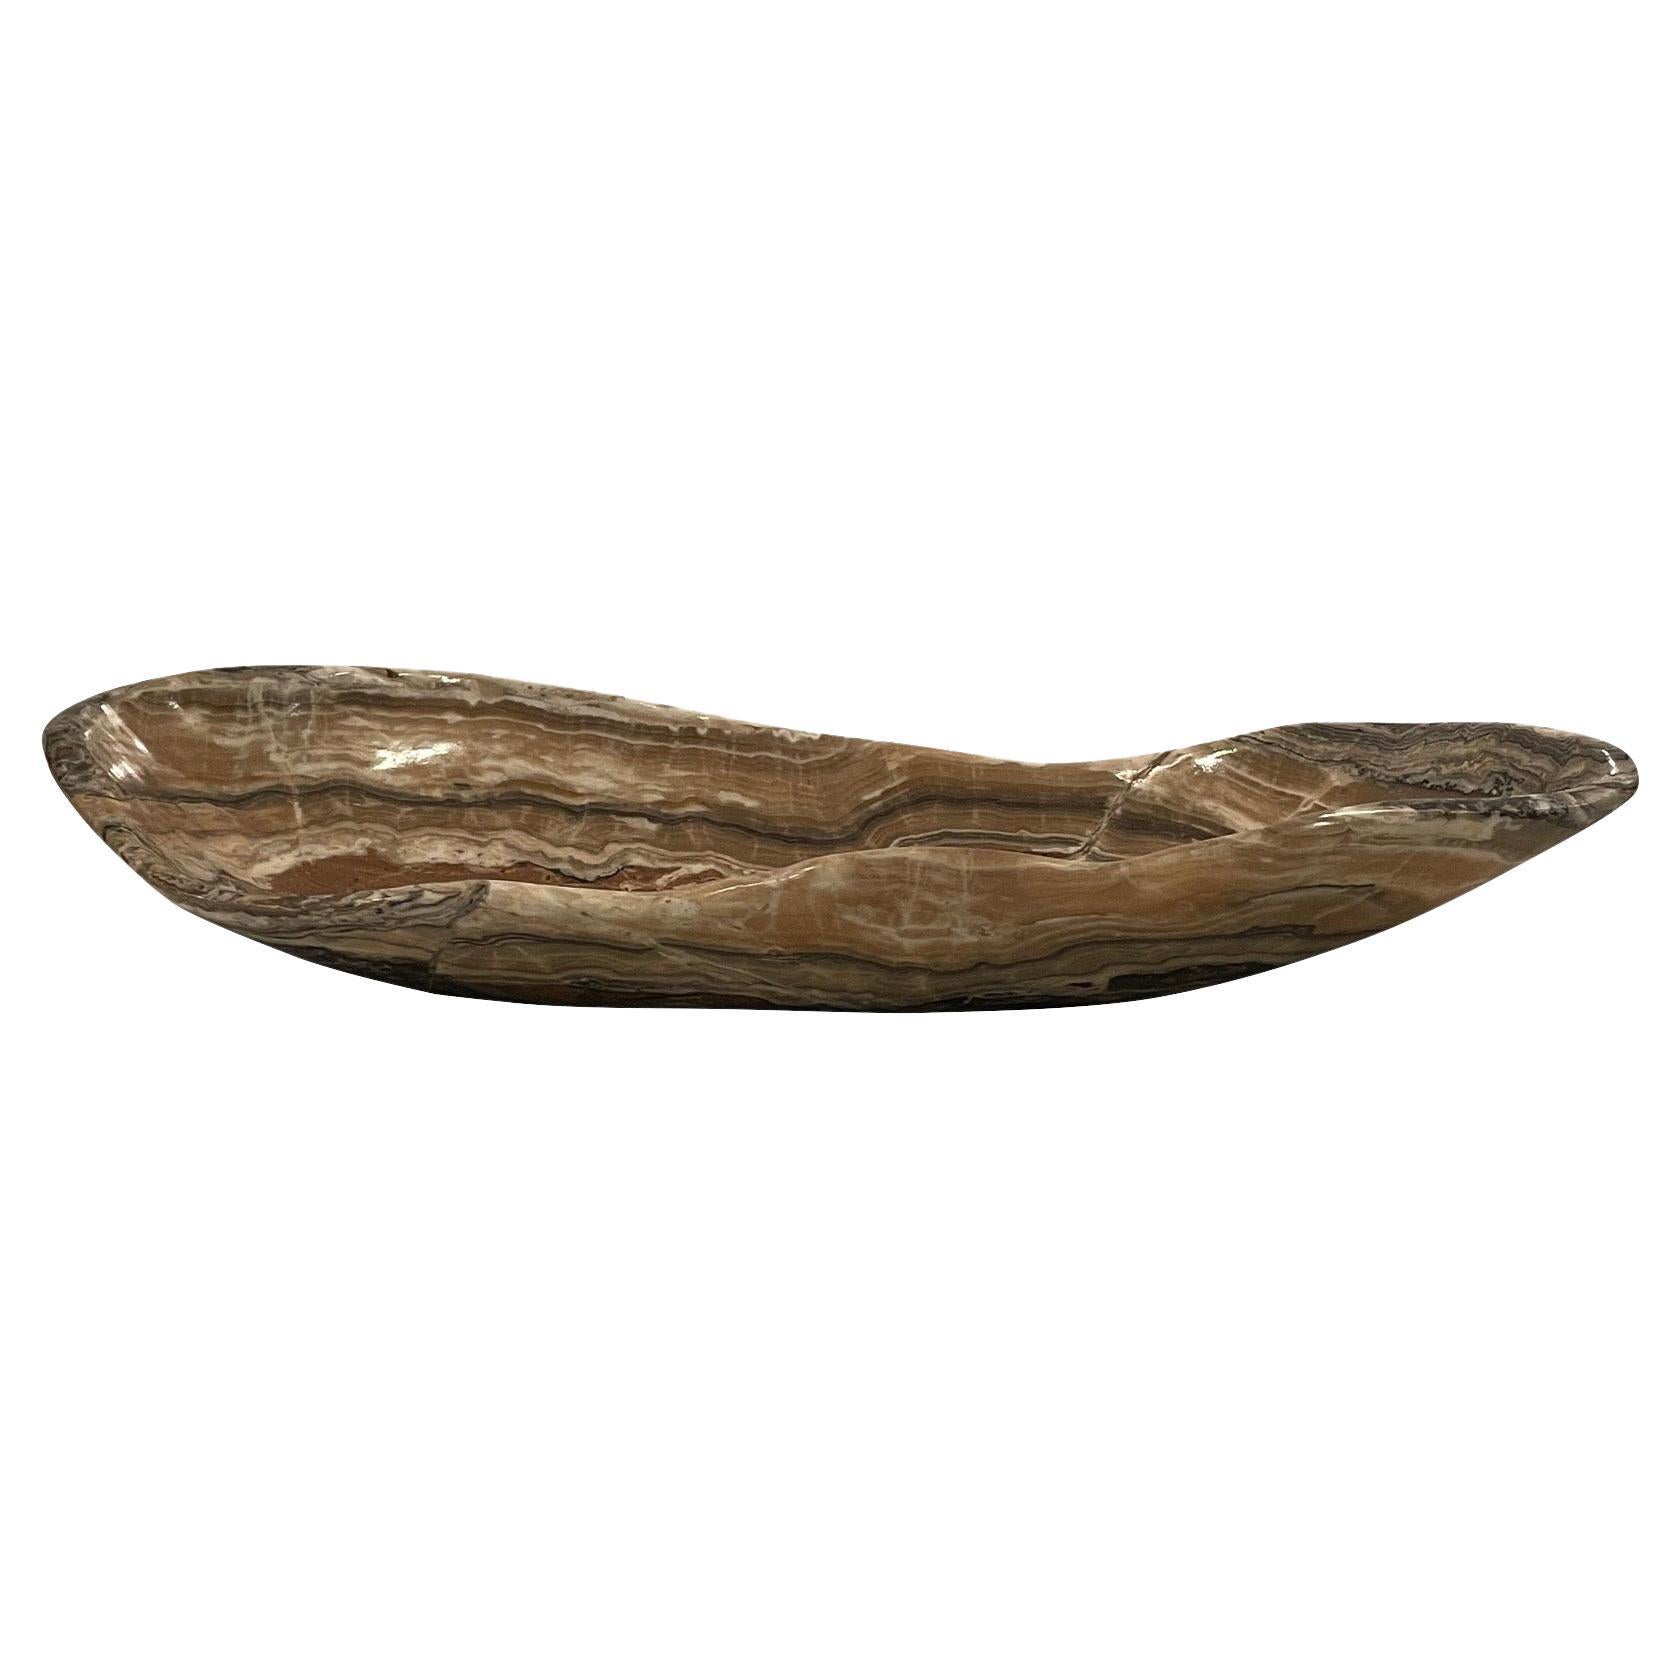 Rust, Grey And Beige Onyx Free Form Shape Bowl, Morocco, Contemporary